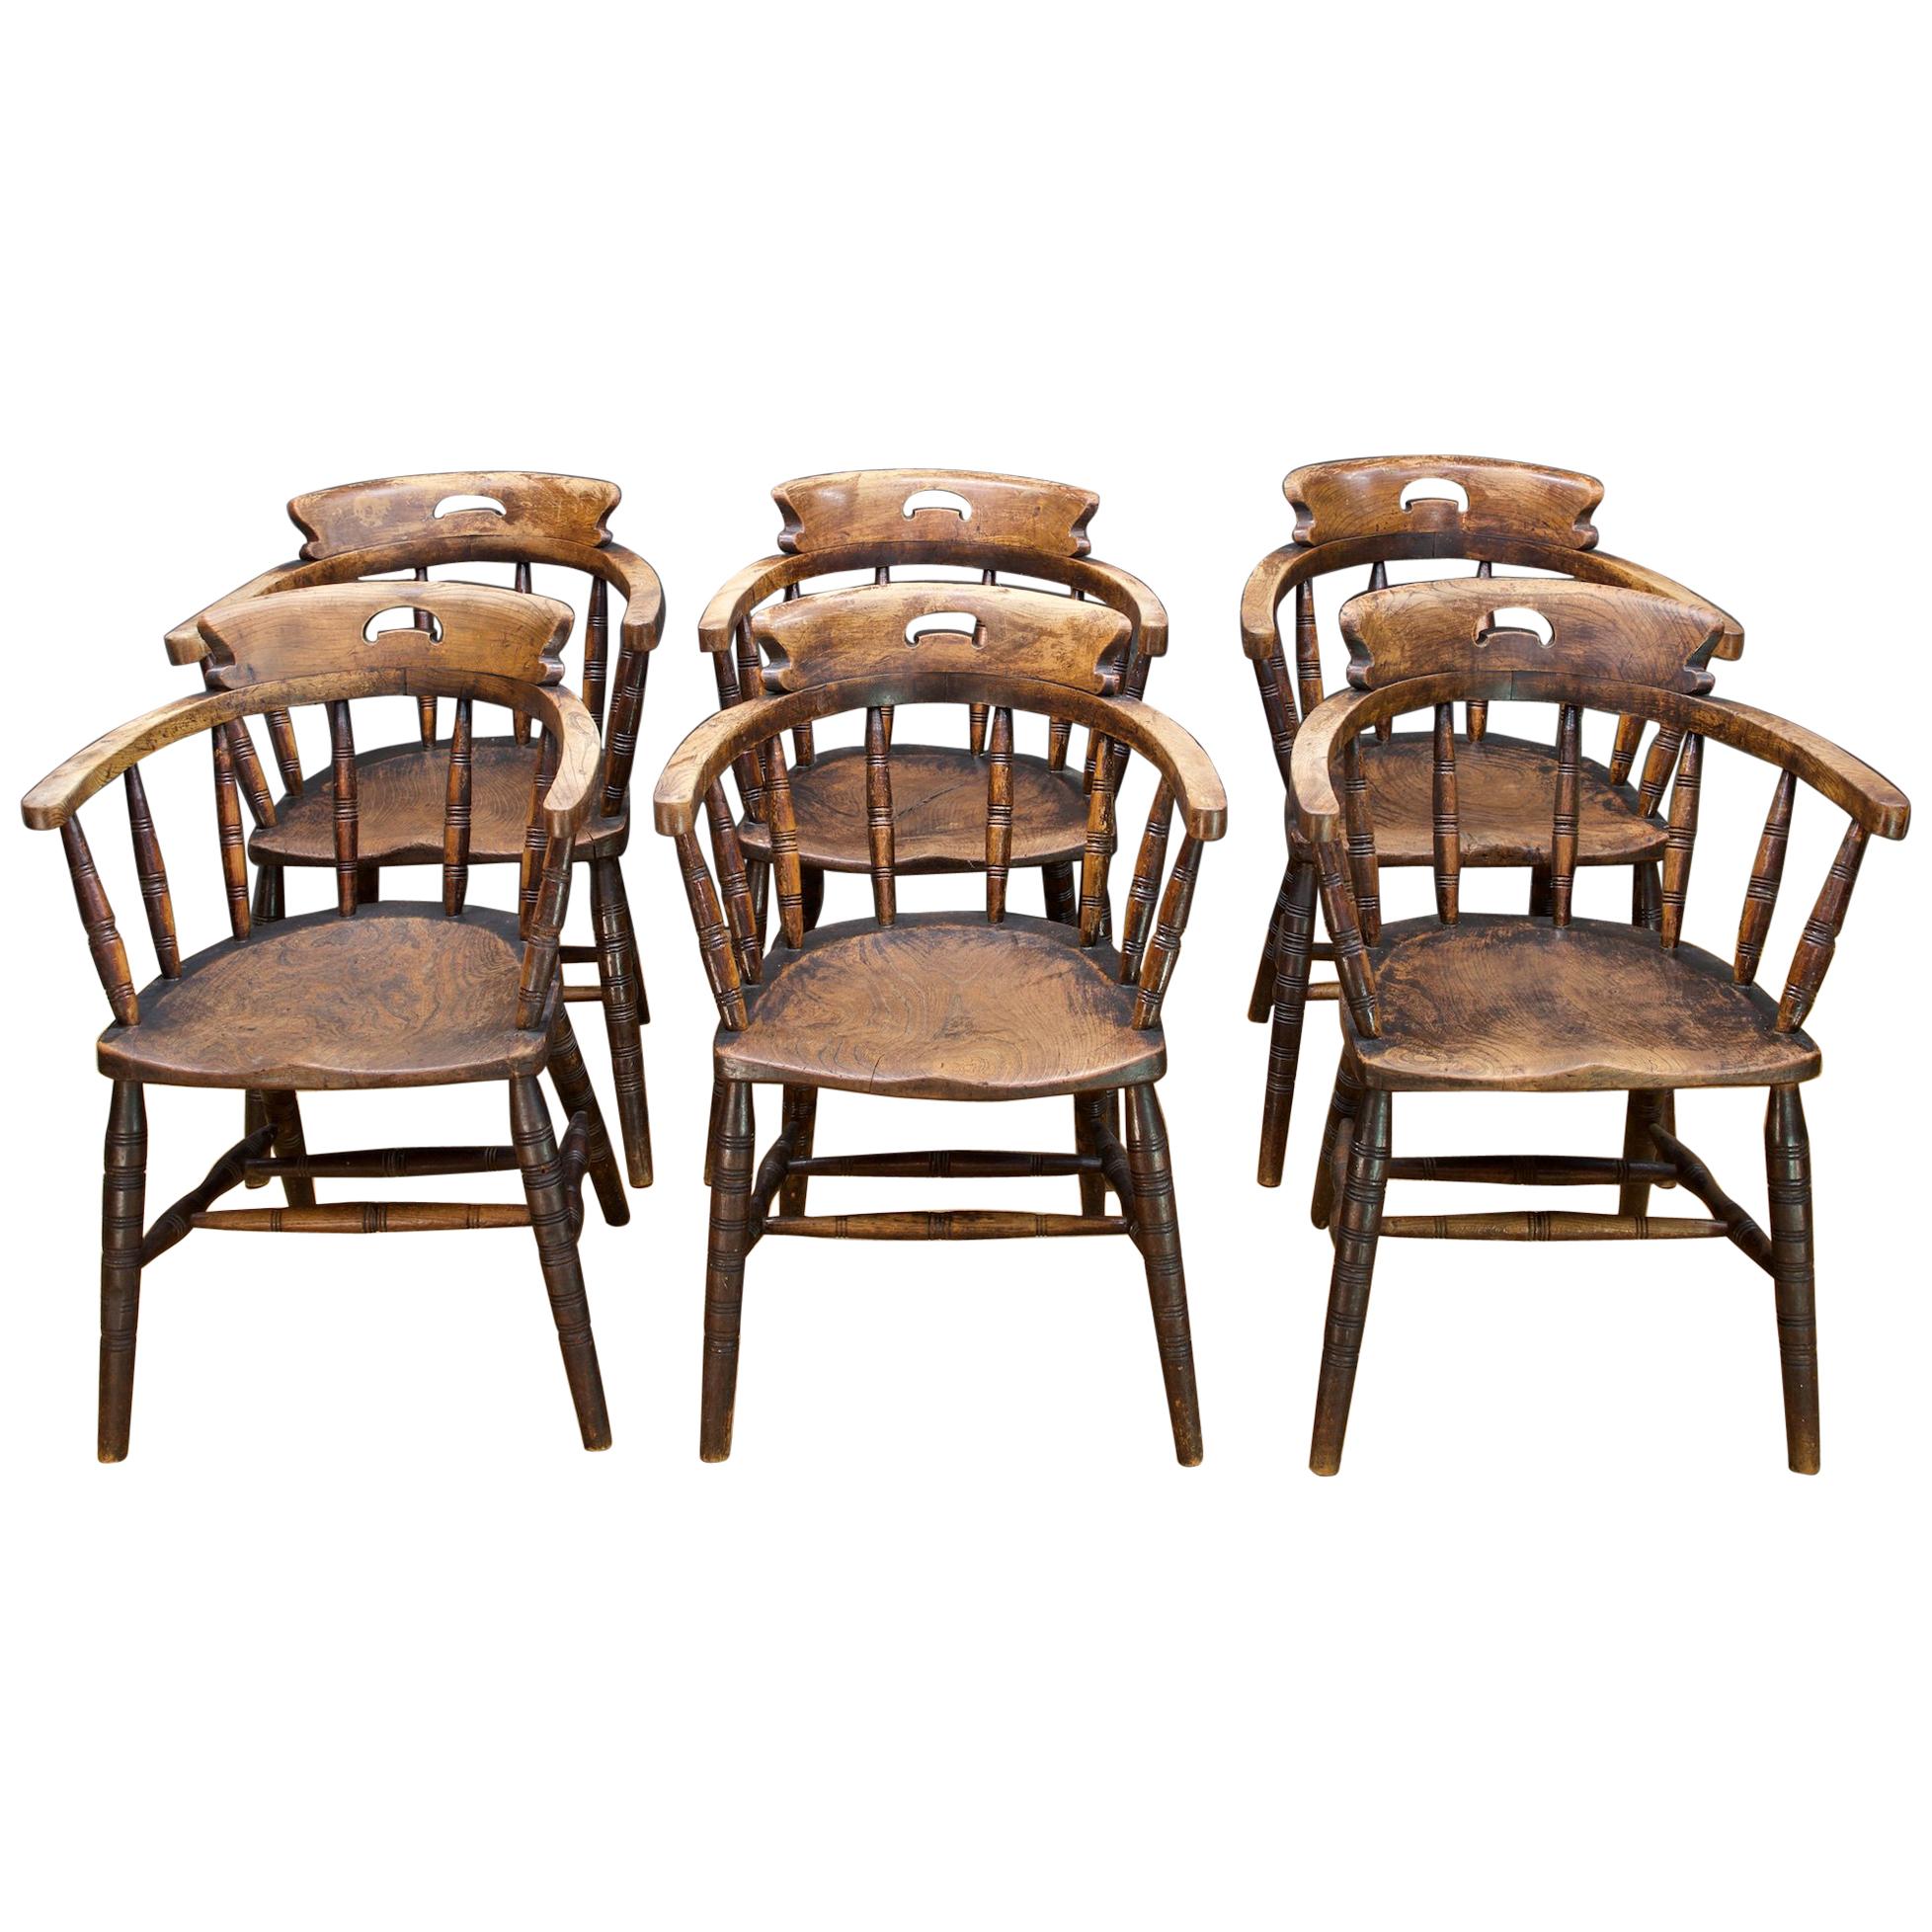 1880s Tavern Dining Chairs Pirate Captains Six Farmhouse Rustic Colonial Craft 